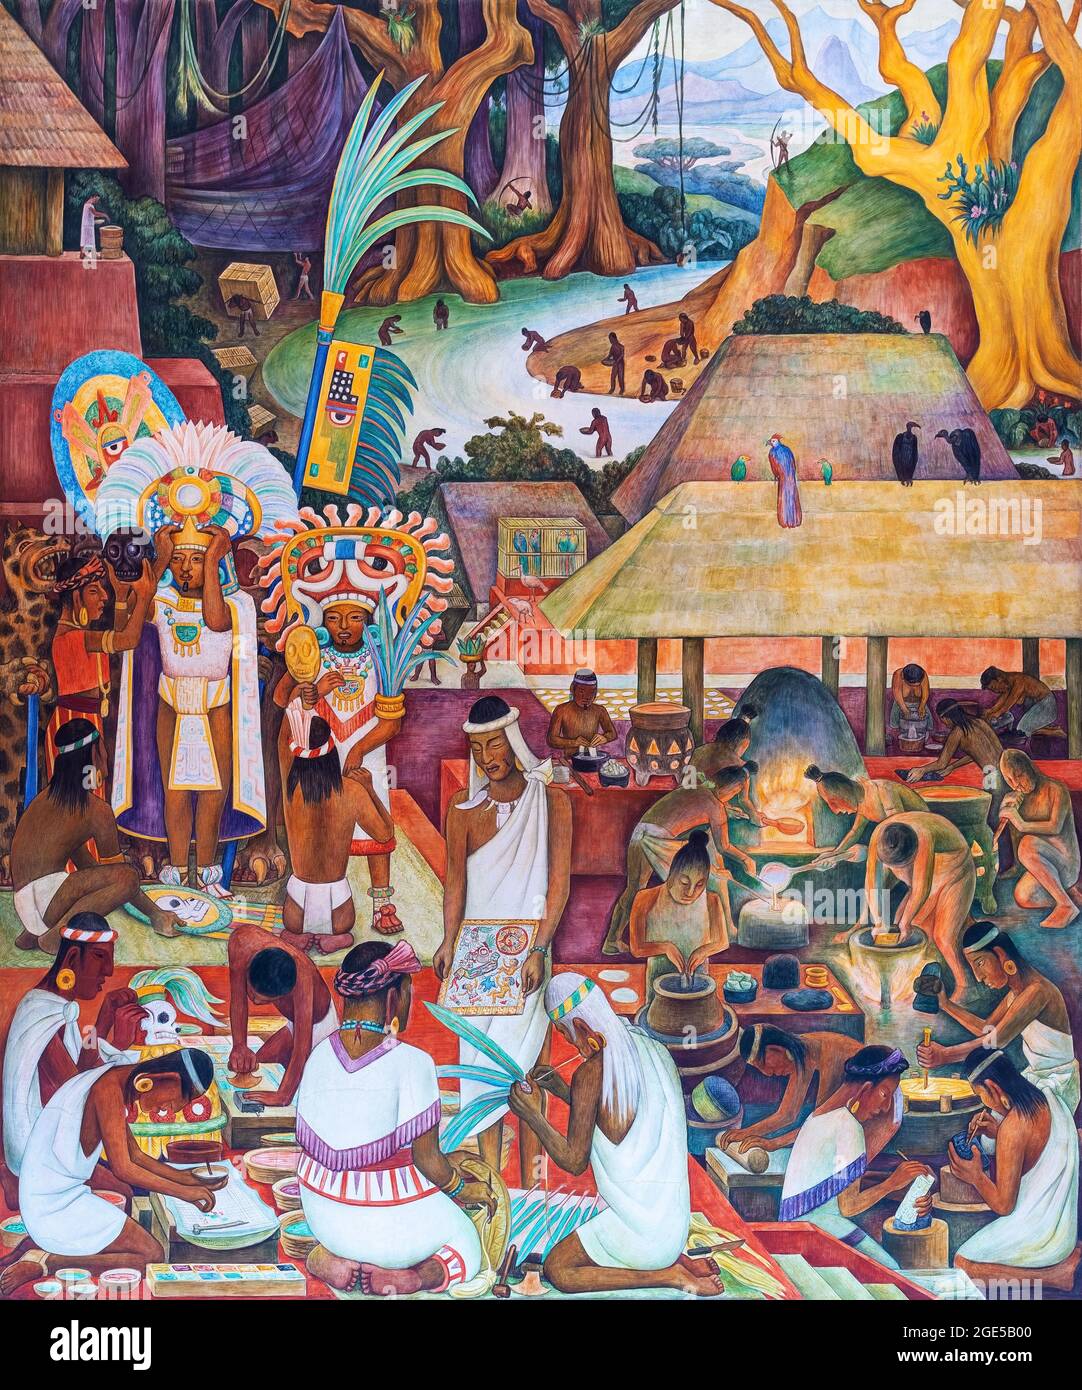 Featherwork art and goldsmith (Zapotec culture), Diego Rivera mural in presidential palace, Mexico City, Mexico. Stock Photo